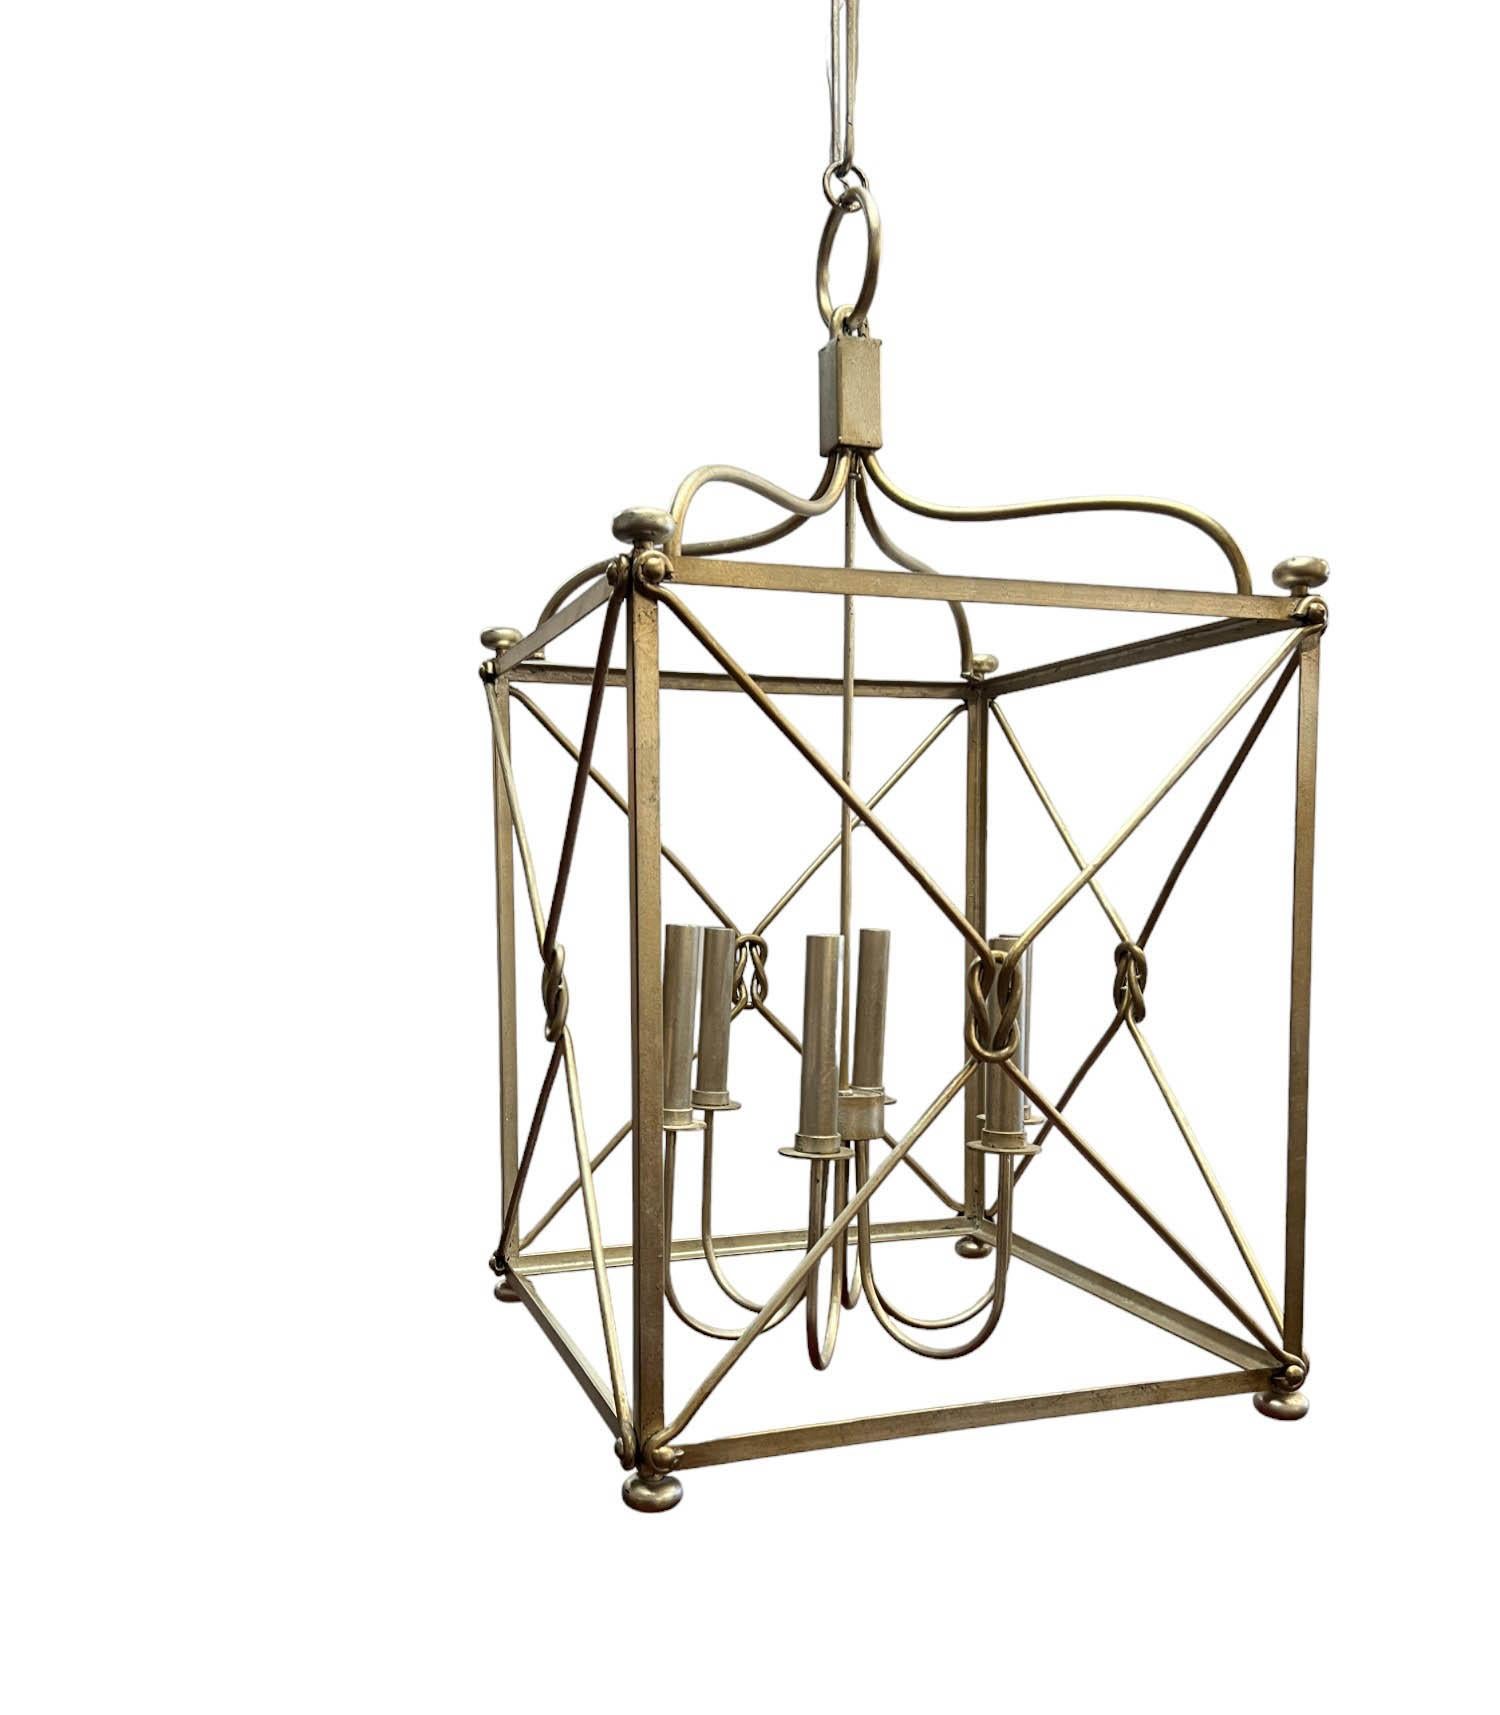 A large open-framed cage-style six-light pendant chandelier finished in a muted/antiqued silver tone. With six lights suspended from a center pole within the open-framed construction, the chandelier will provide ample illumination to brighten any